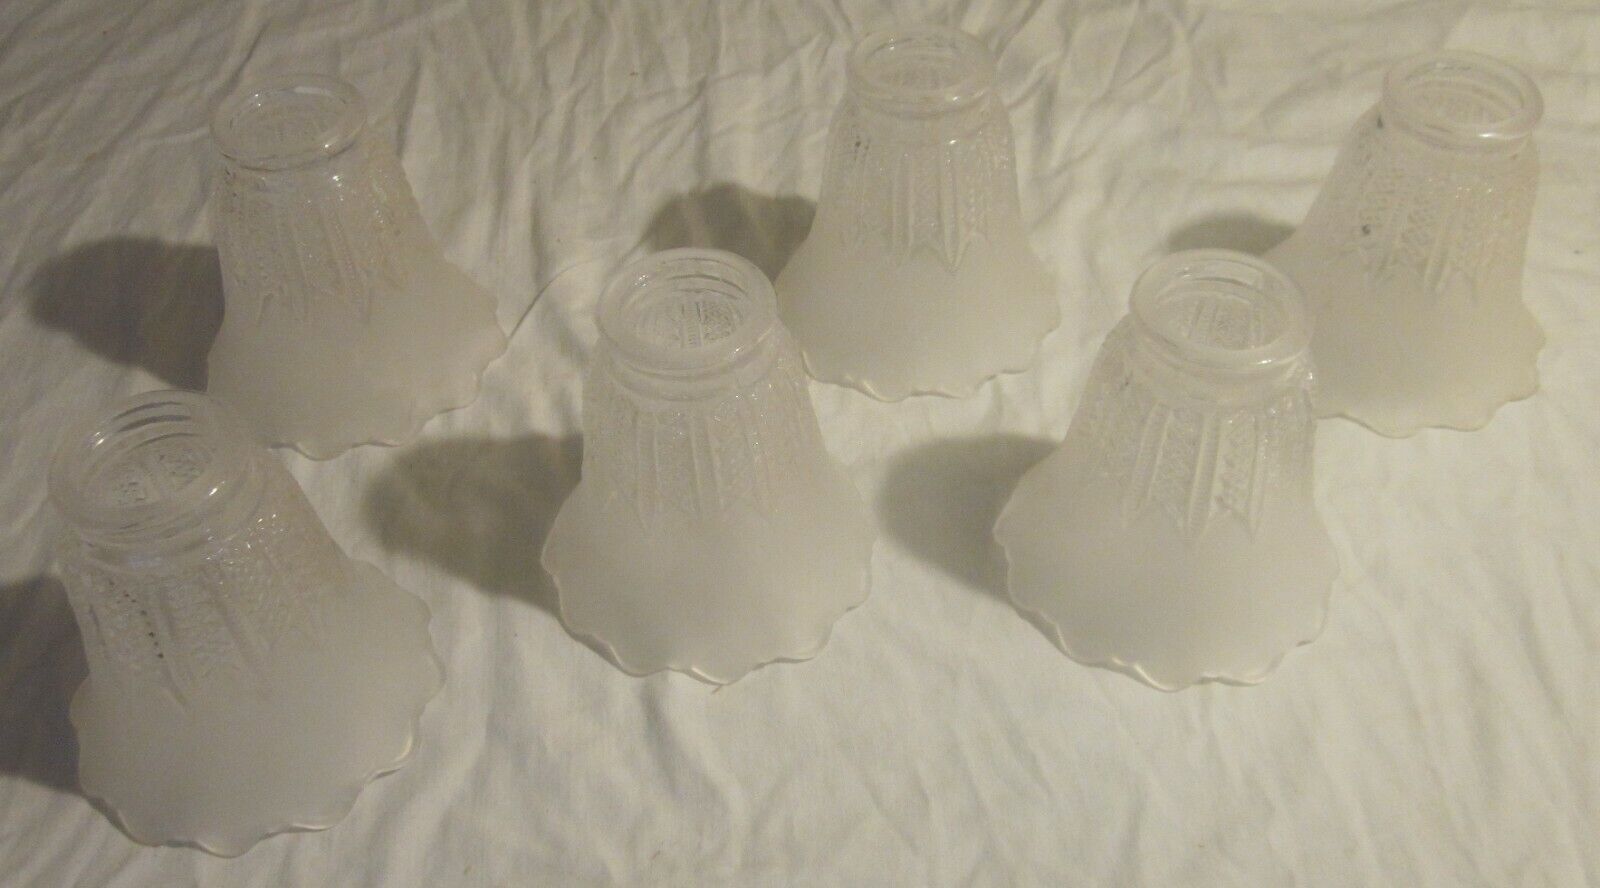 Set of 6 Matching PRESSED & FROSTED GLASS LIGHT SHADES -- Art Deco or Depression